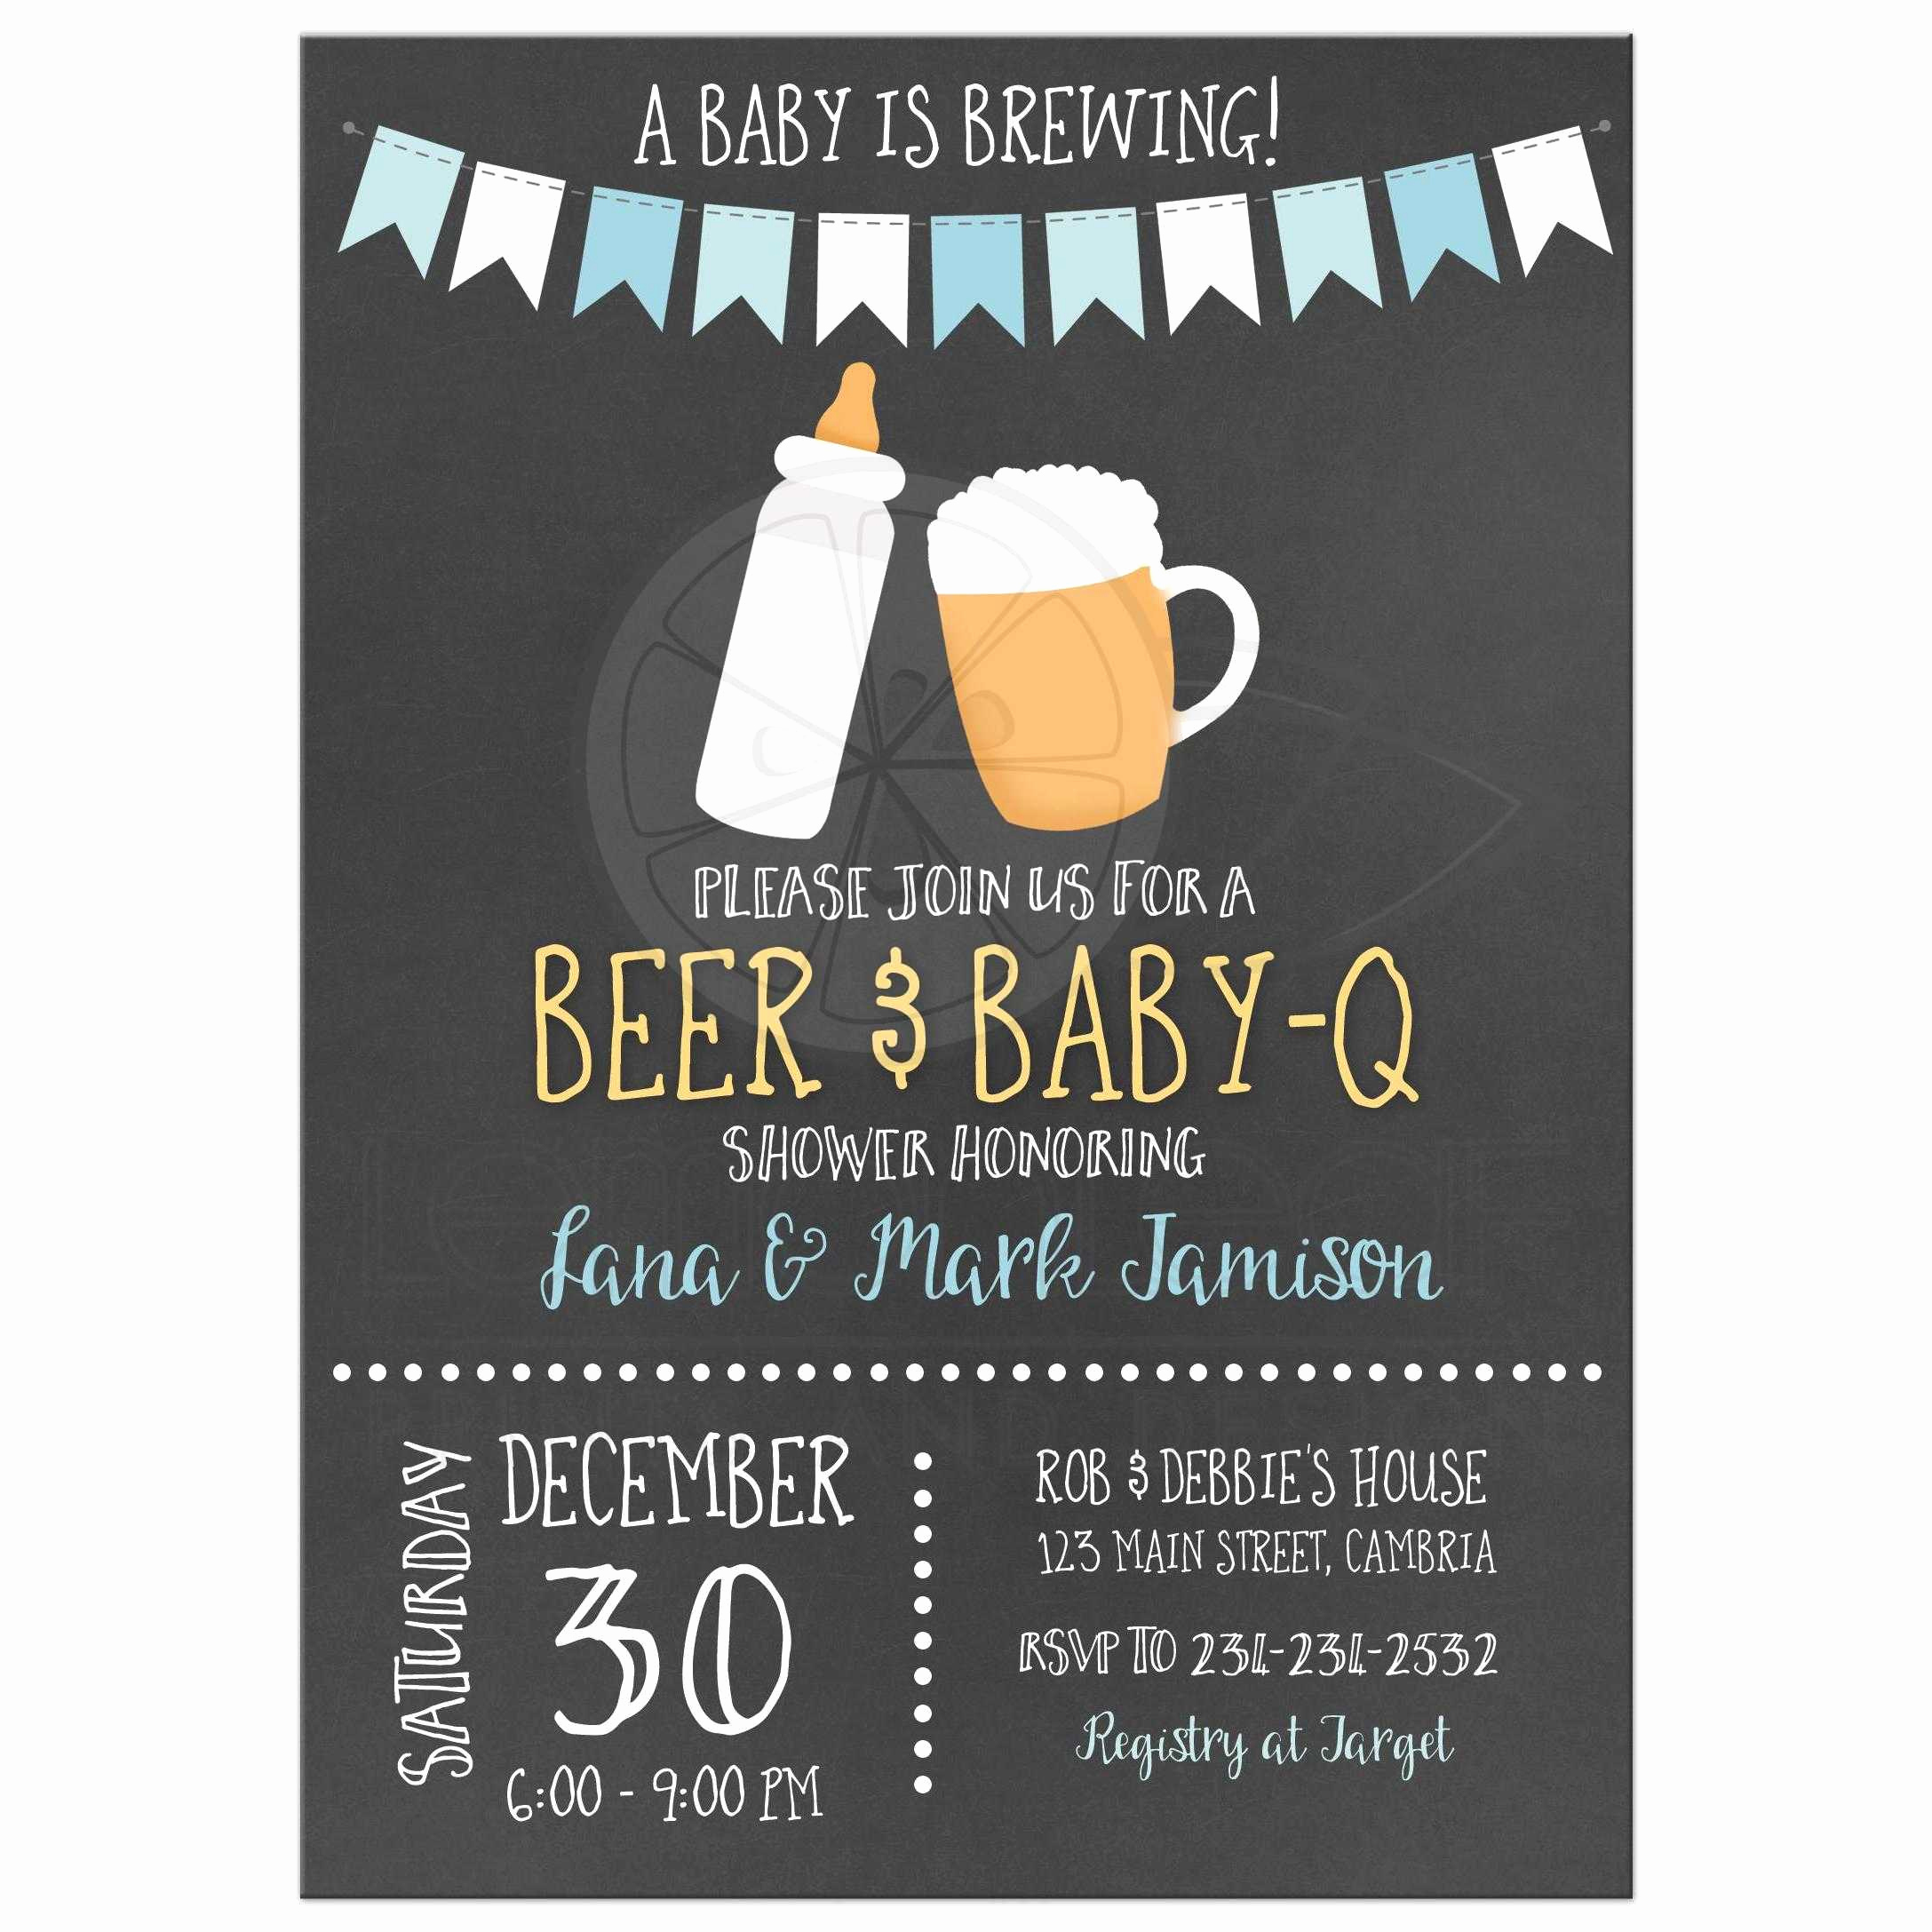 Baby Q Invitation Template Luxury Baby is Brewing Bbq Baby Q Co Ed Chalkboard Baby Shower